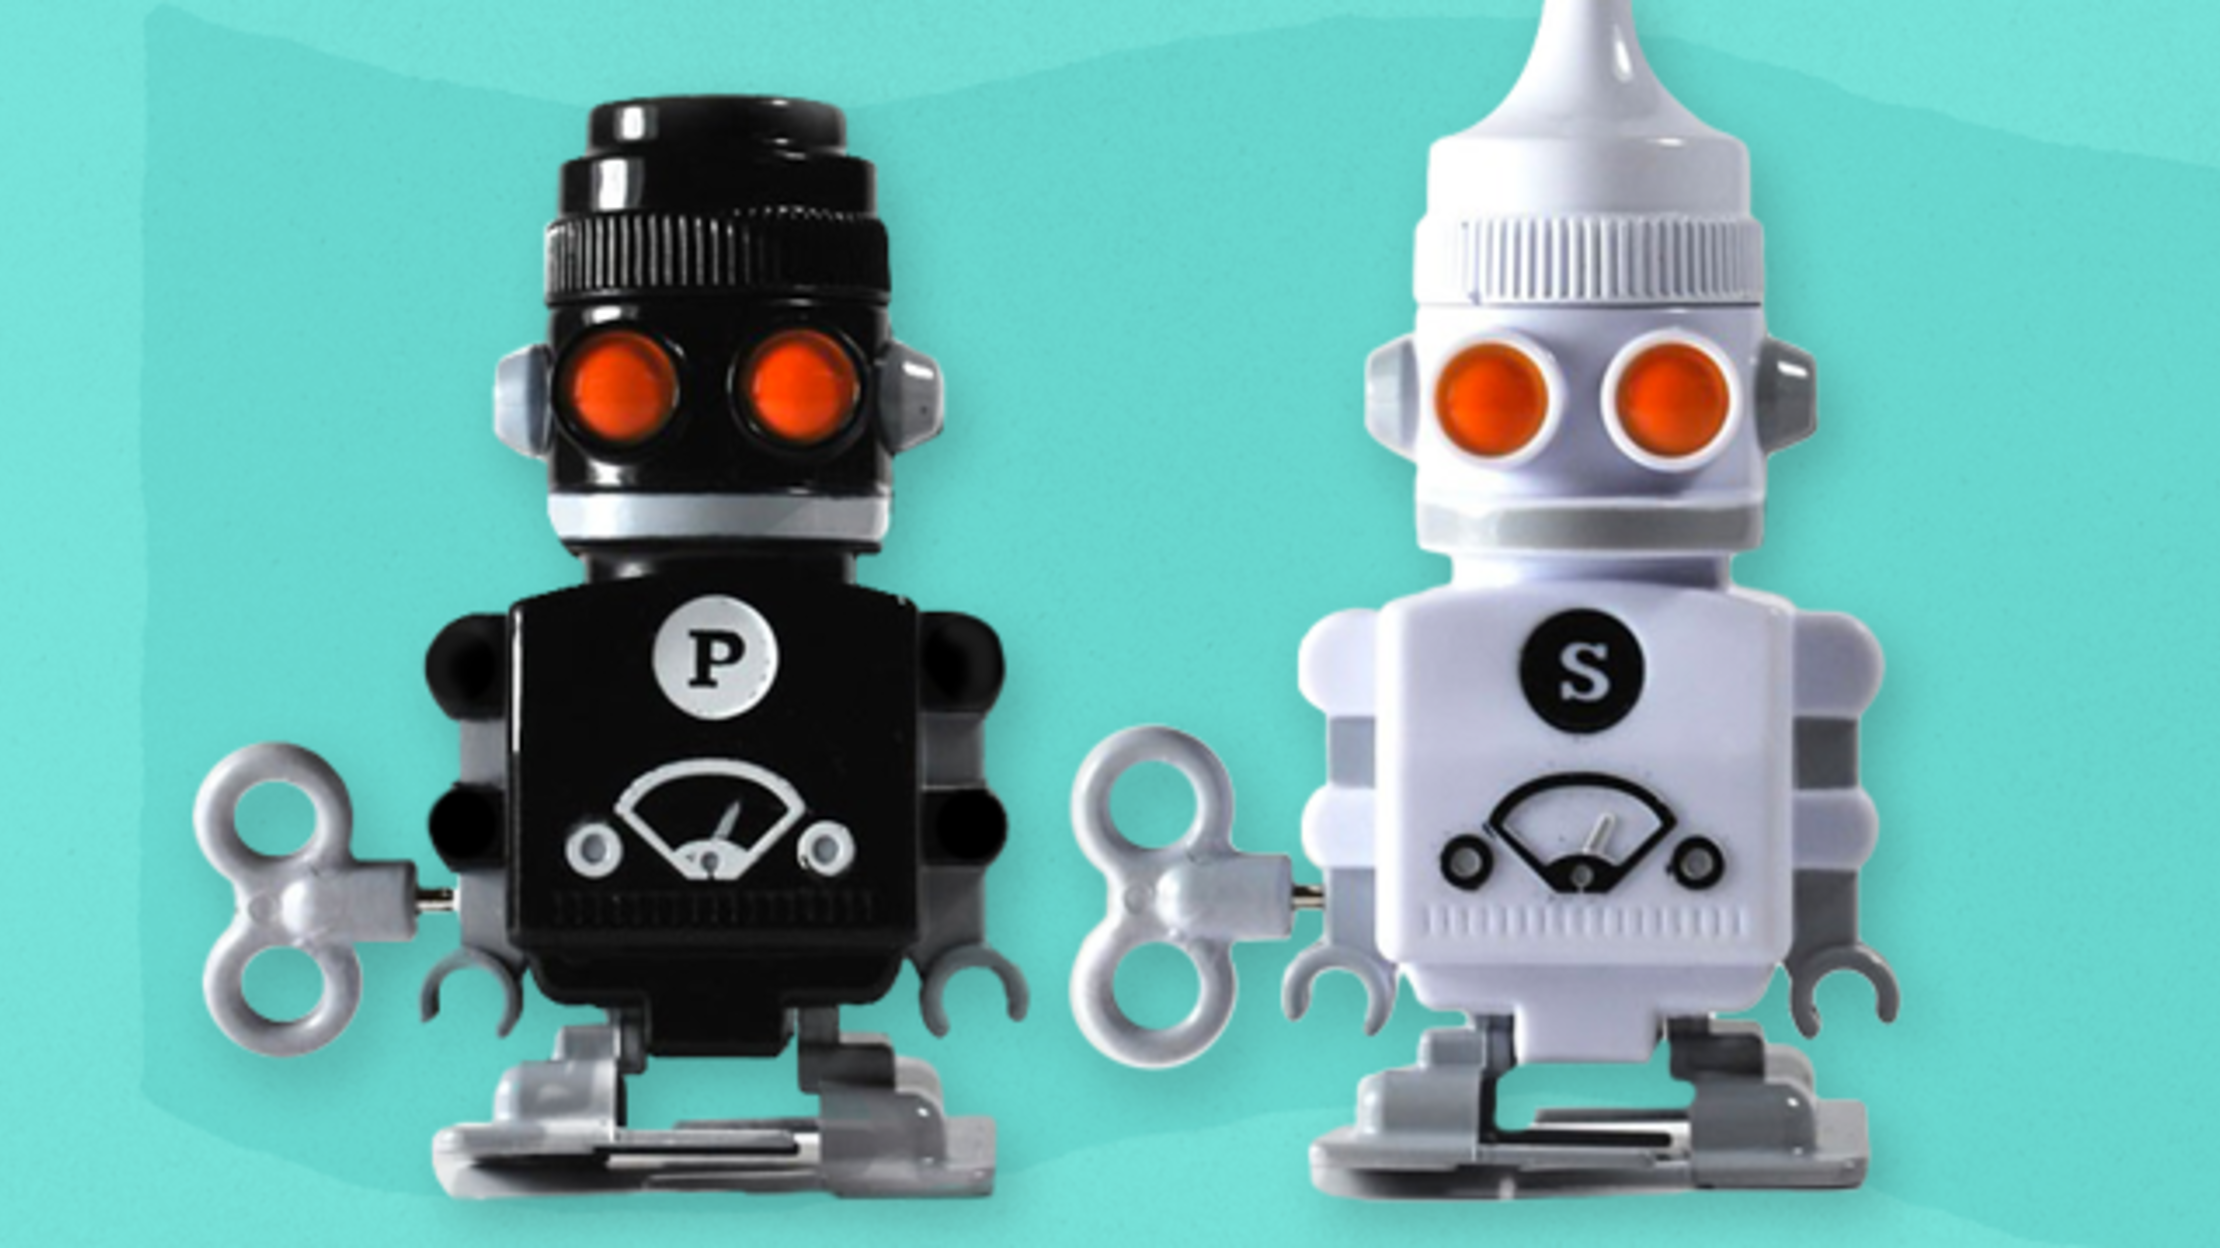 Win Robot Salt and Pepper Shakers From Our Store | Mental Floss